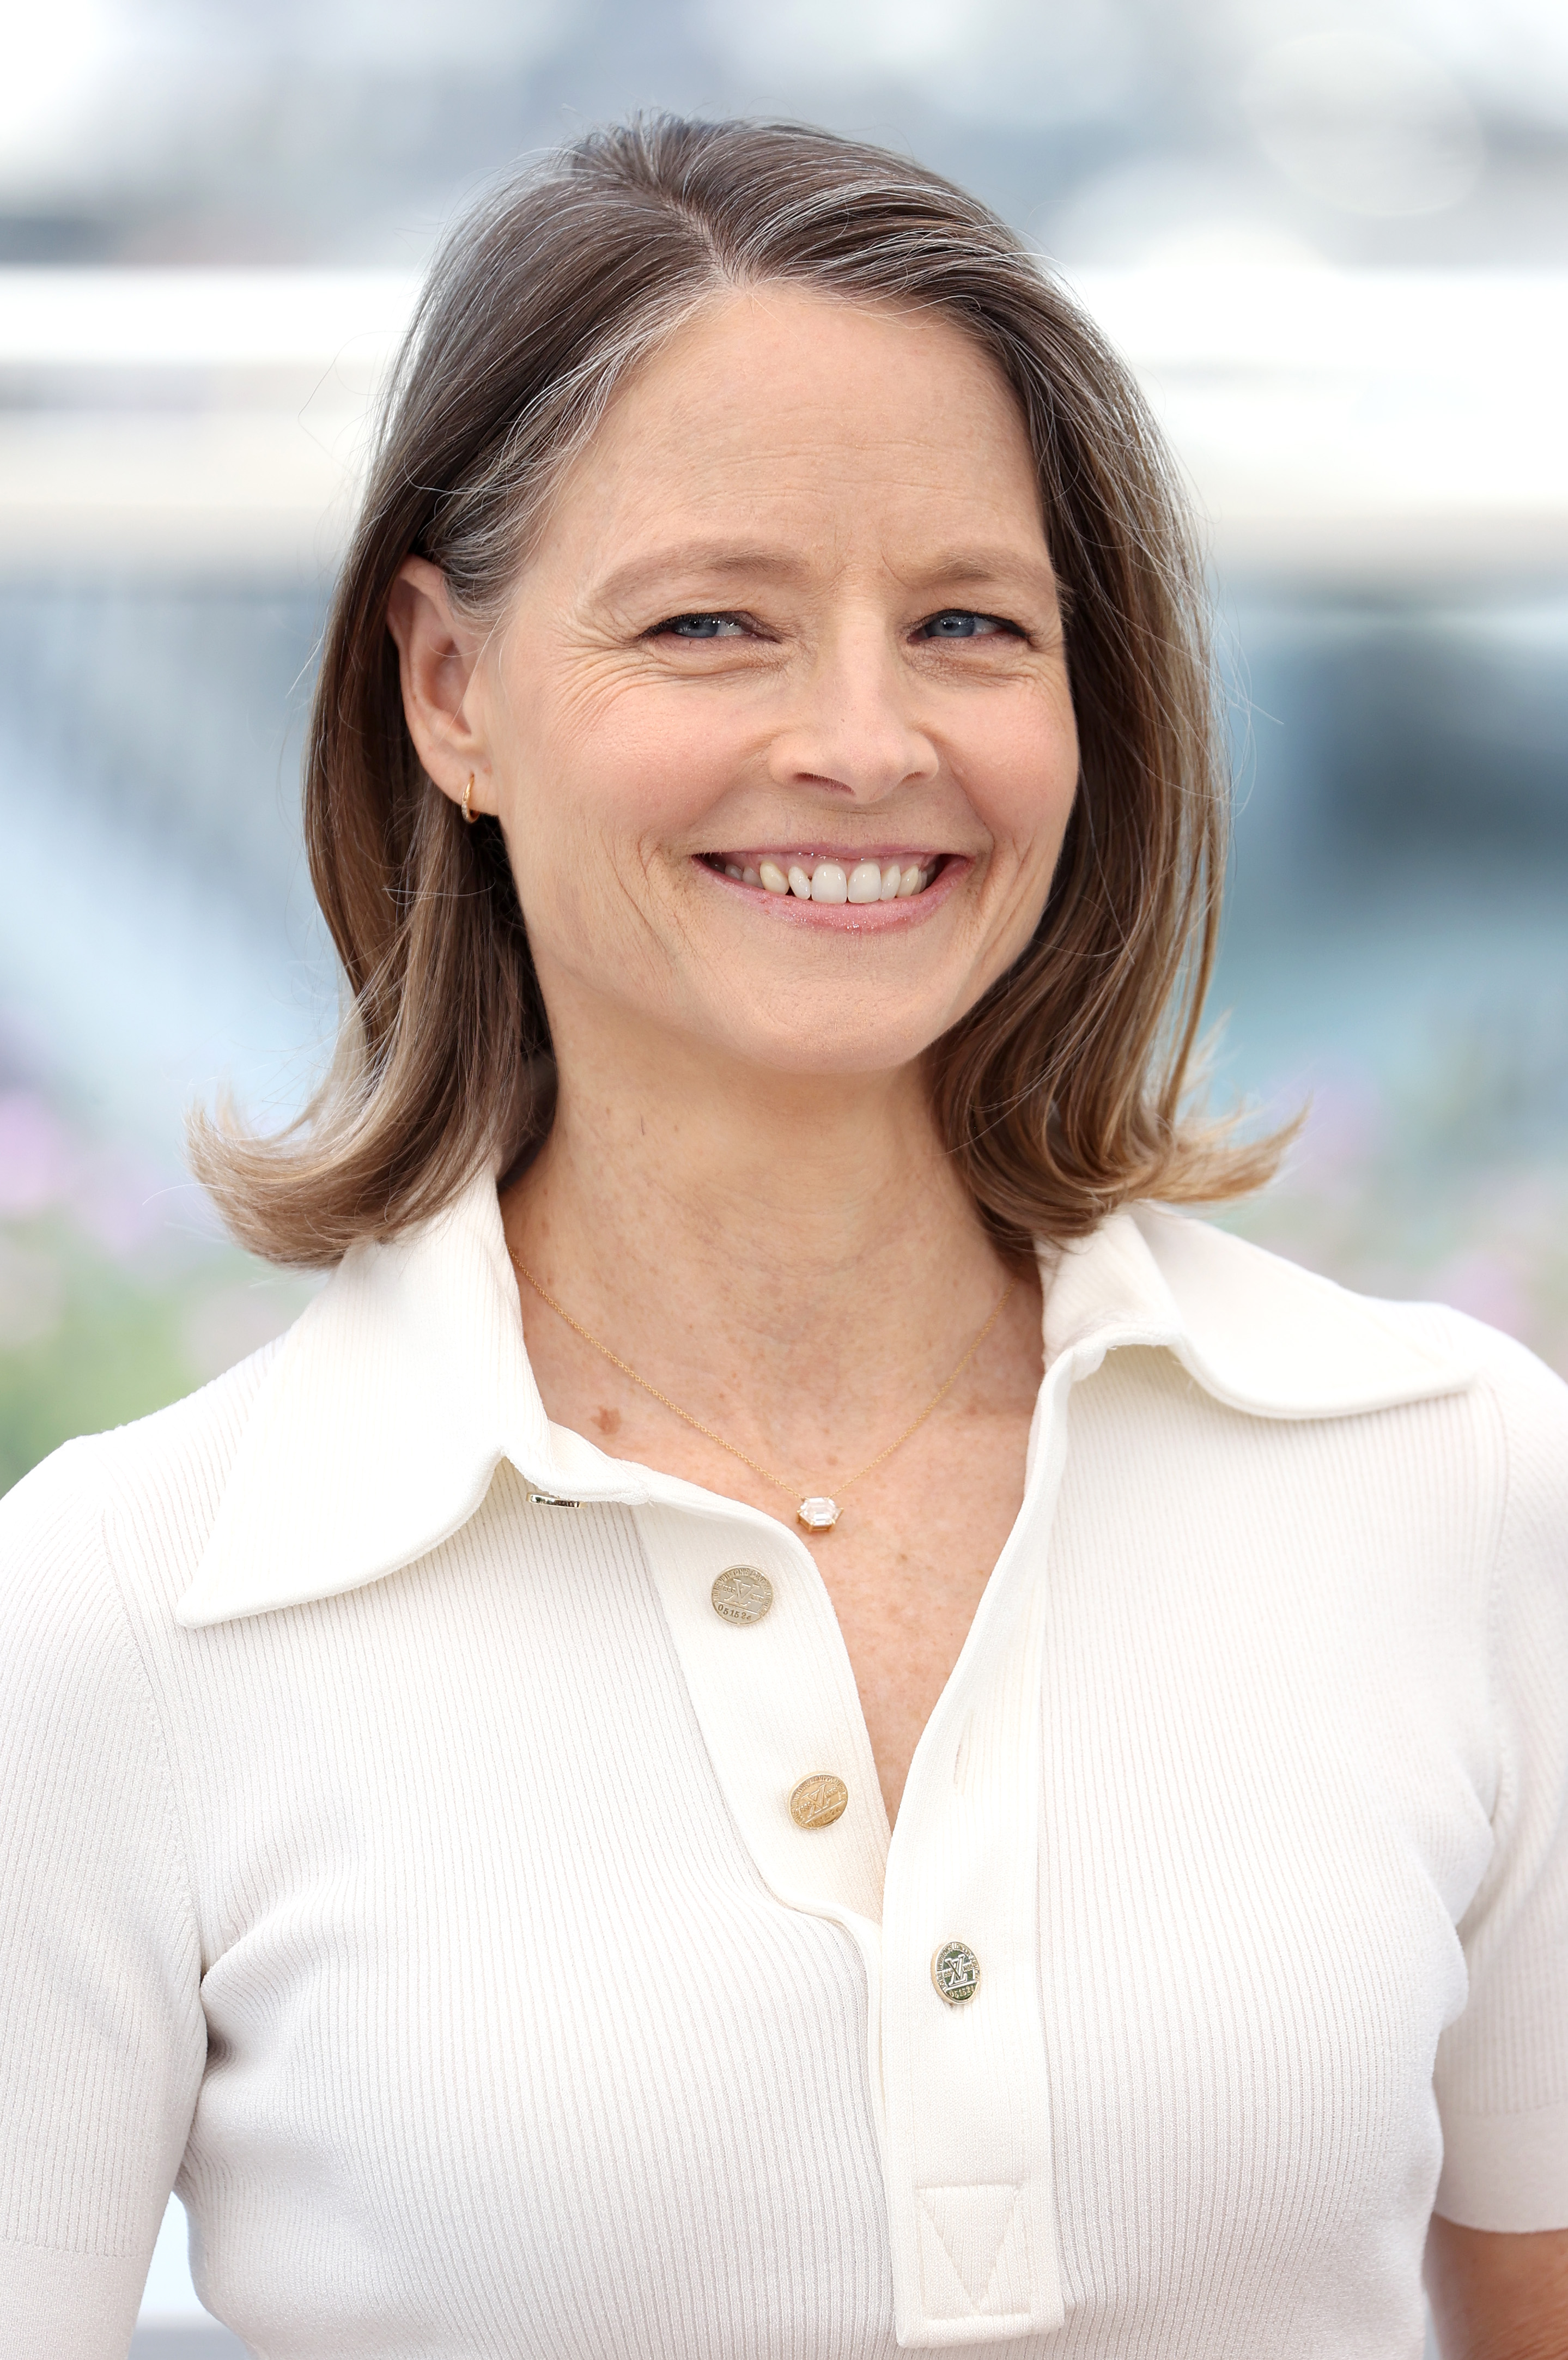 Jodie Foster at the 74th Annual Cannes Film Festival in France, 2021 | Source: Getty Images